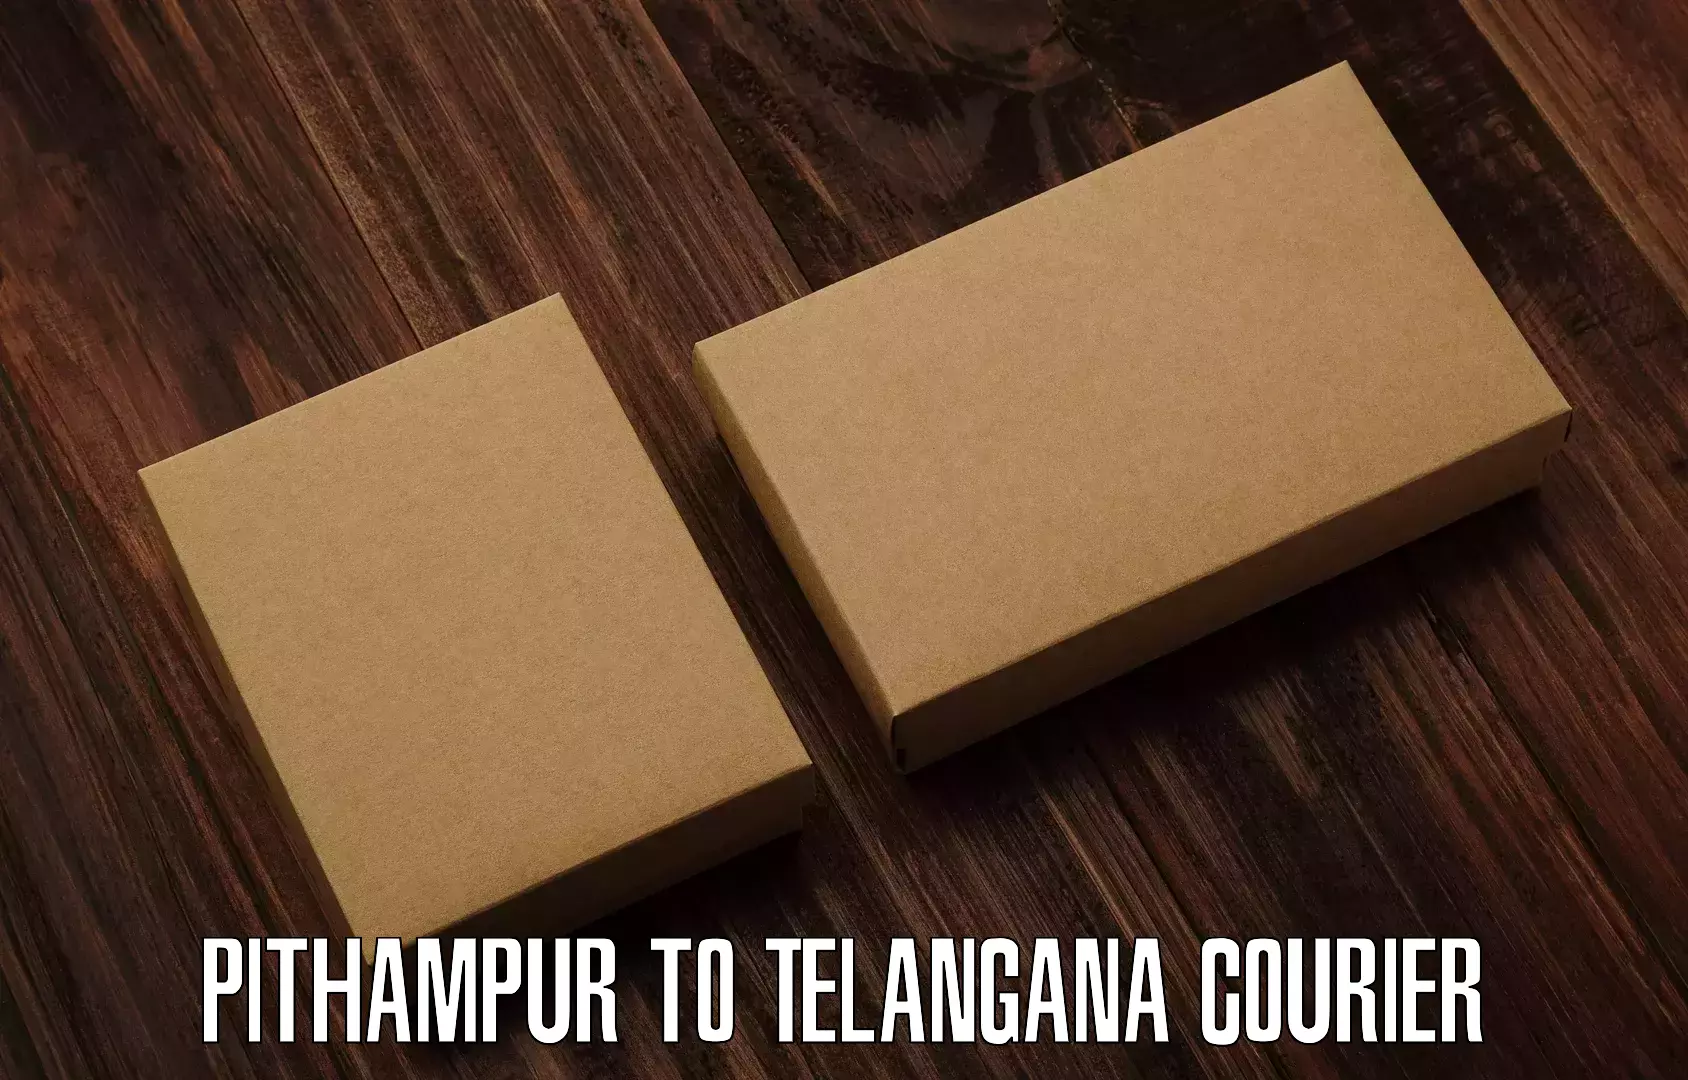 Subscription-based courier Pithampur to Ghanpur